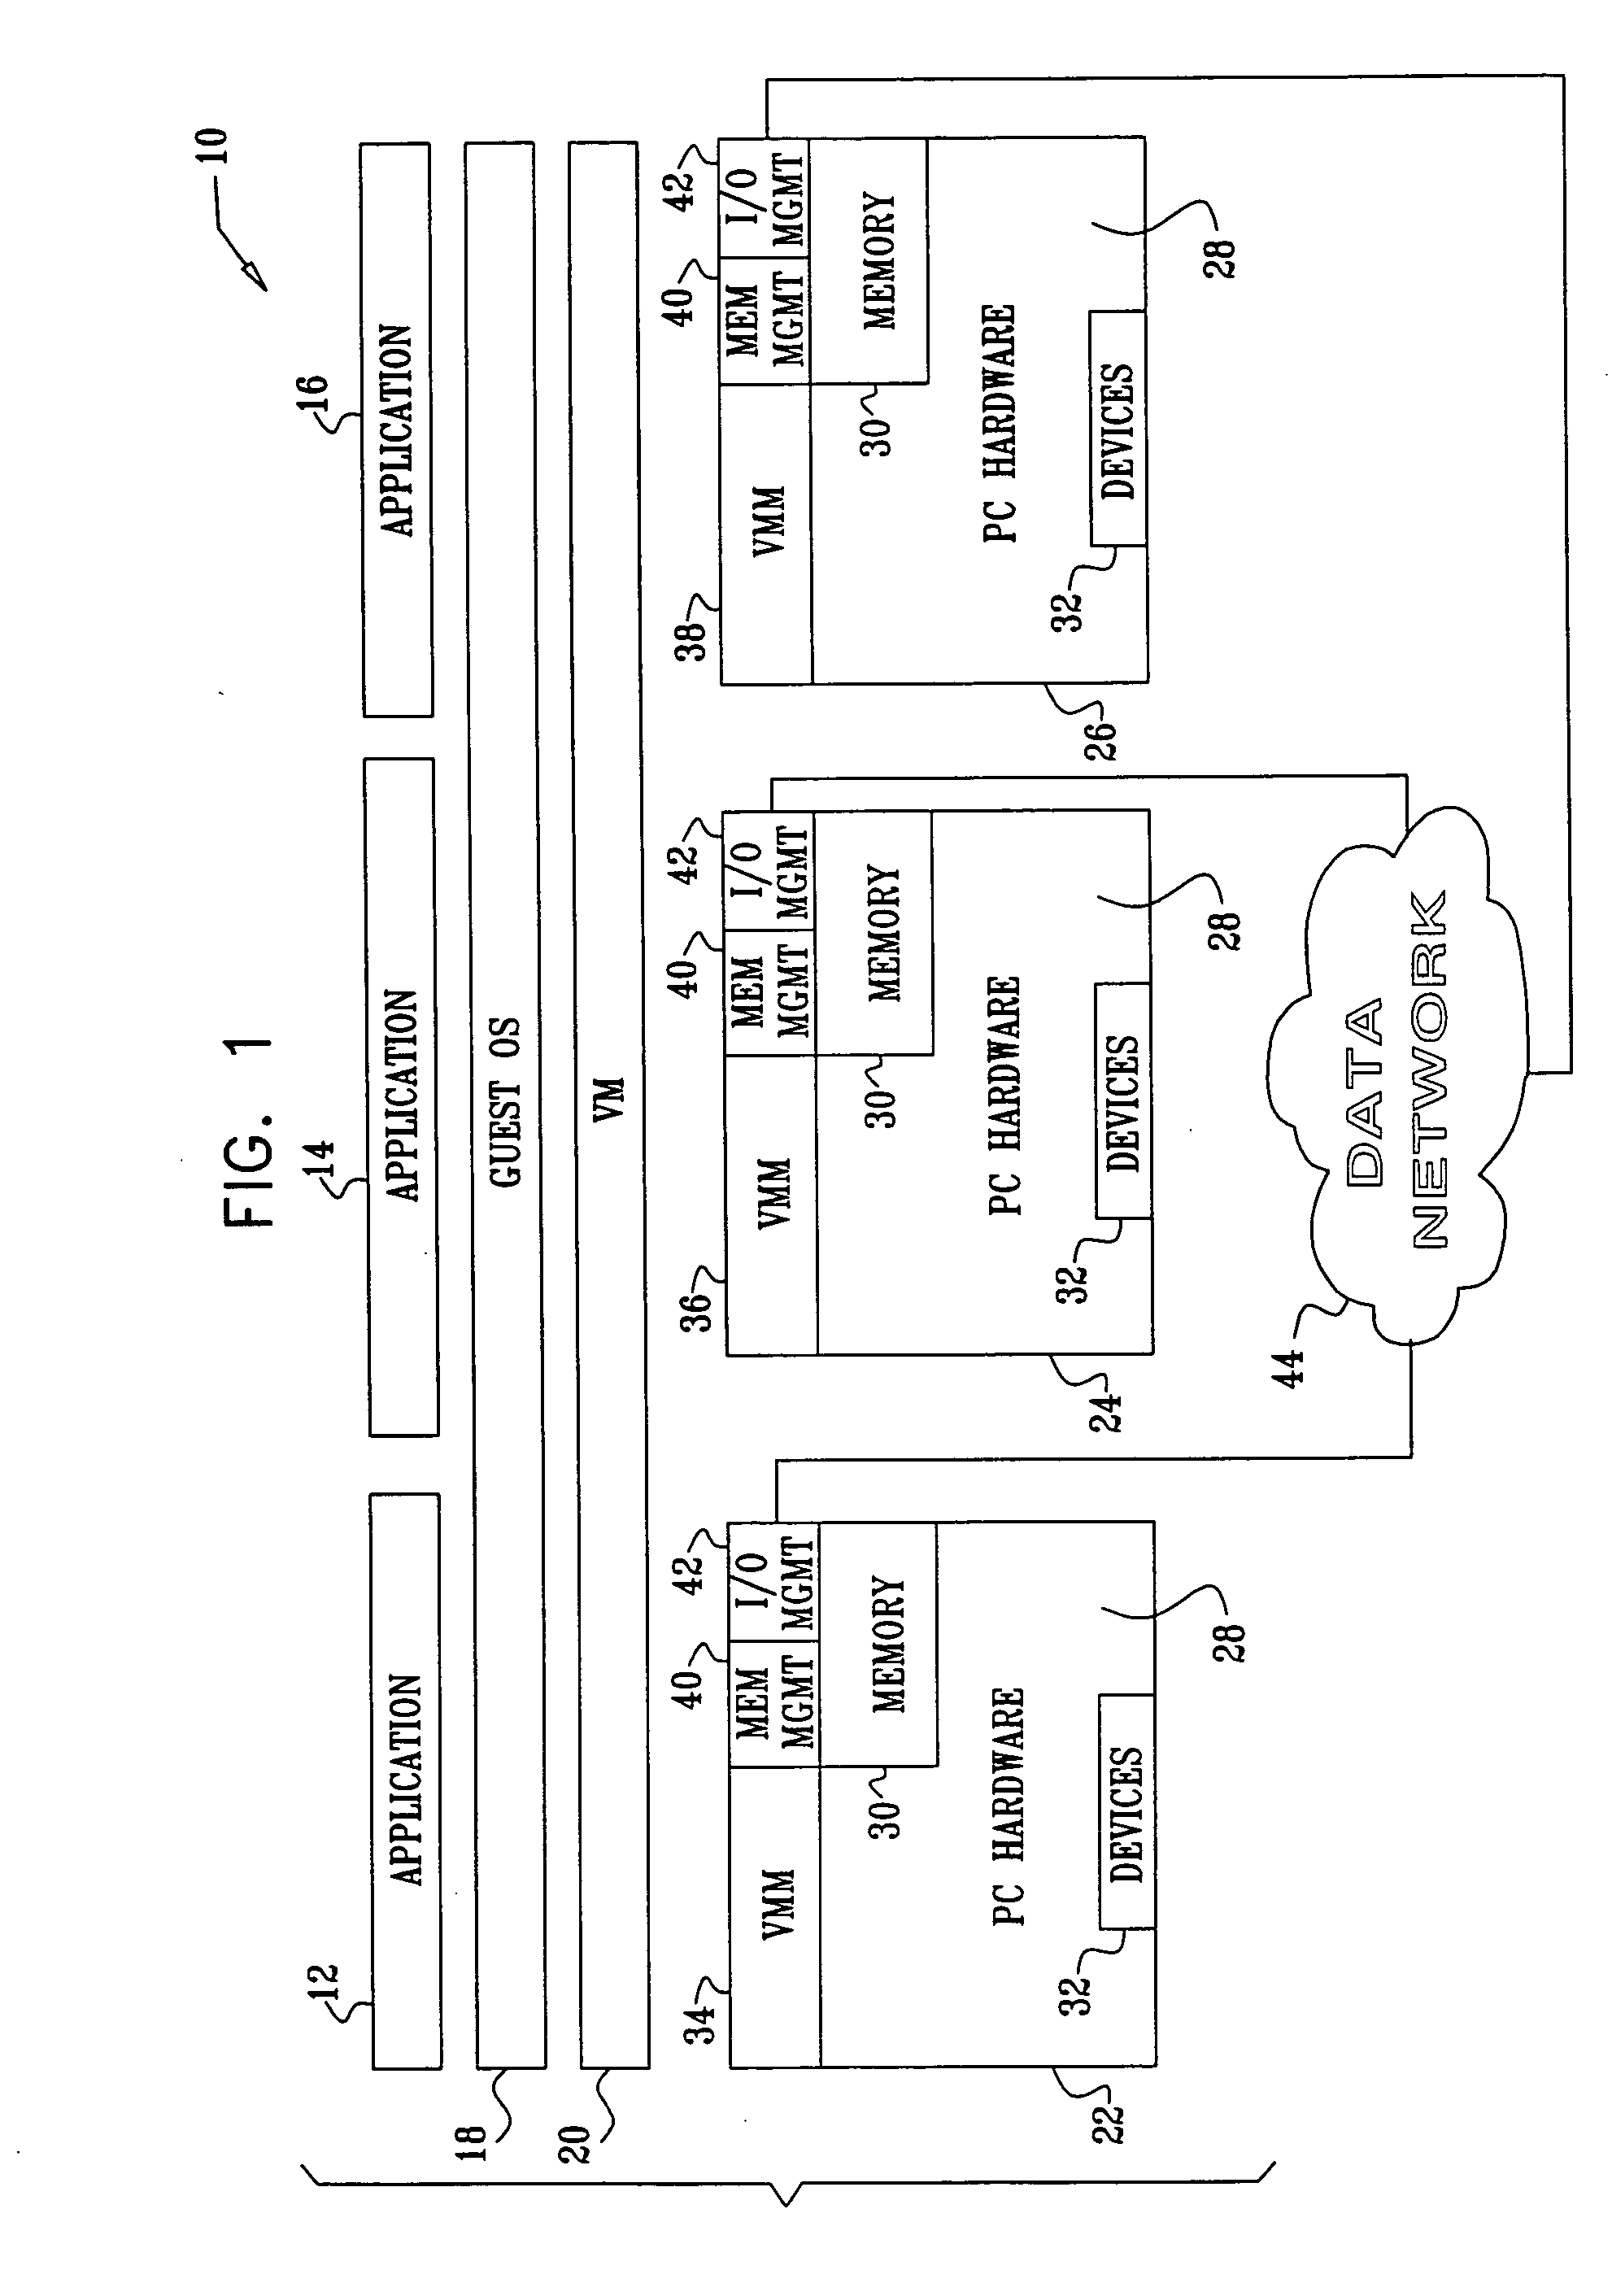 Cluster-based operating system-agnostic virtual computing system